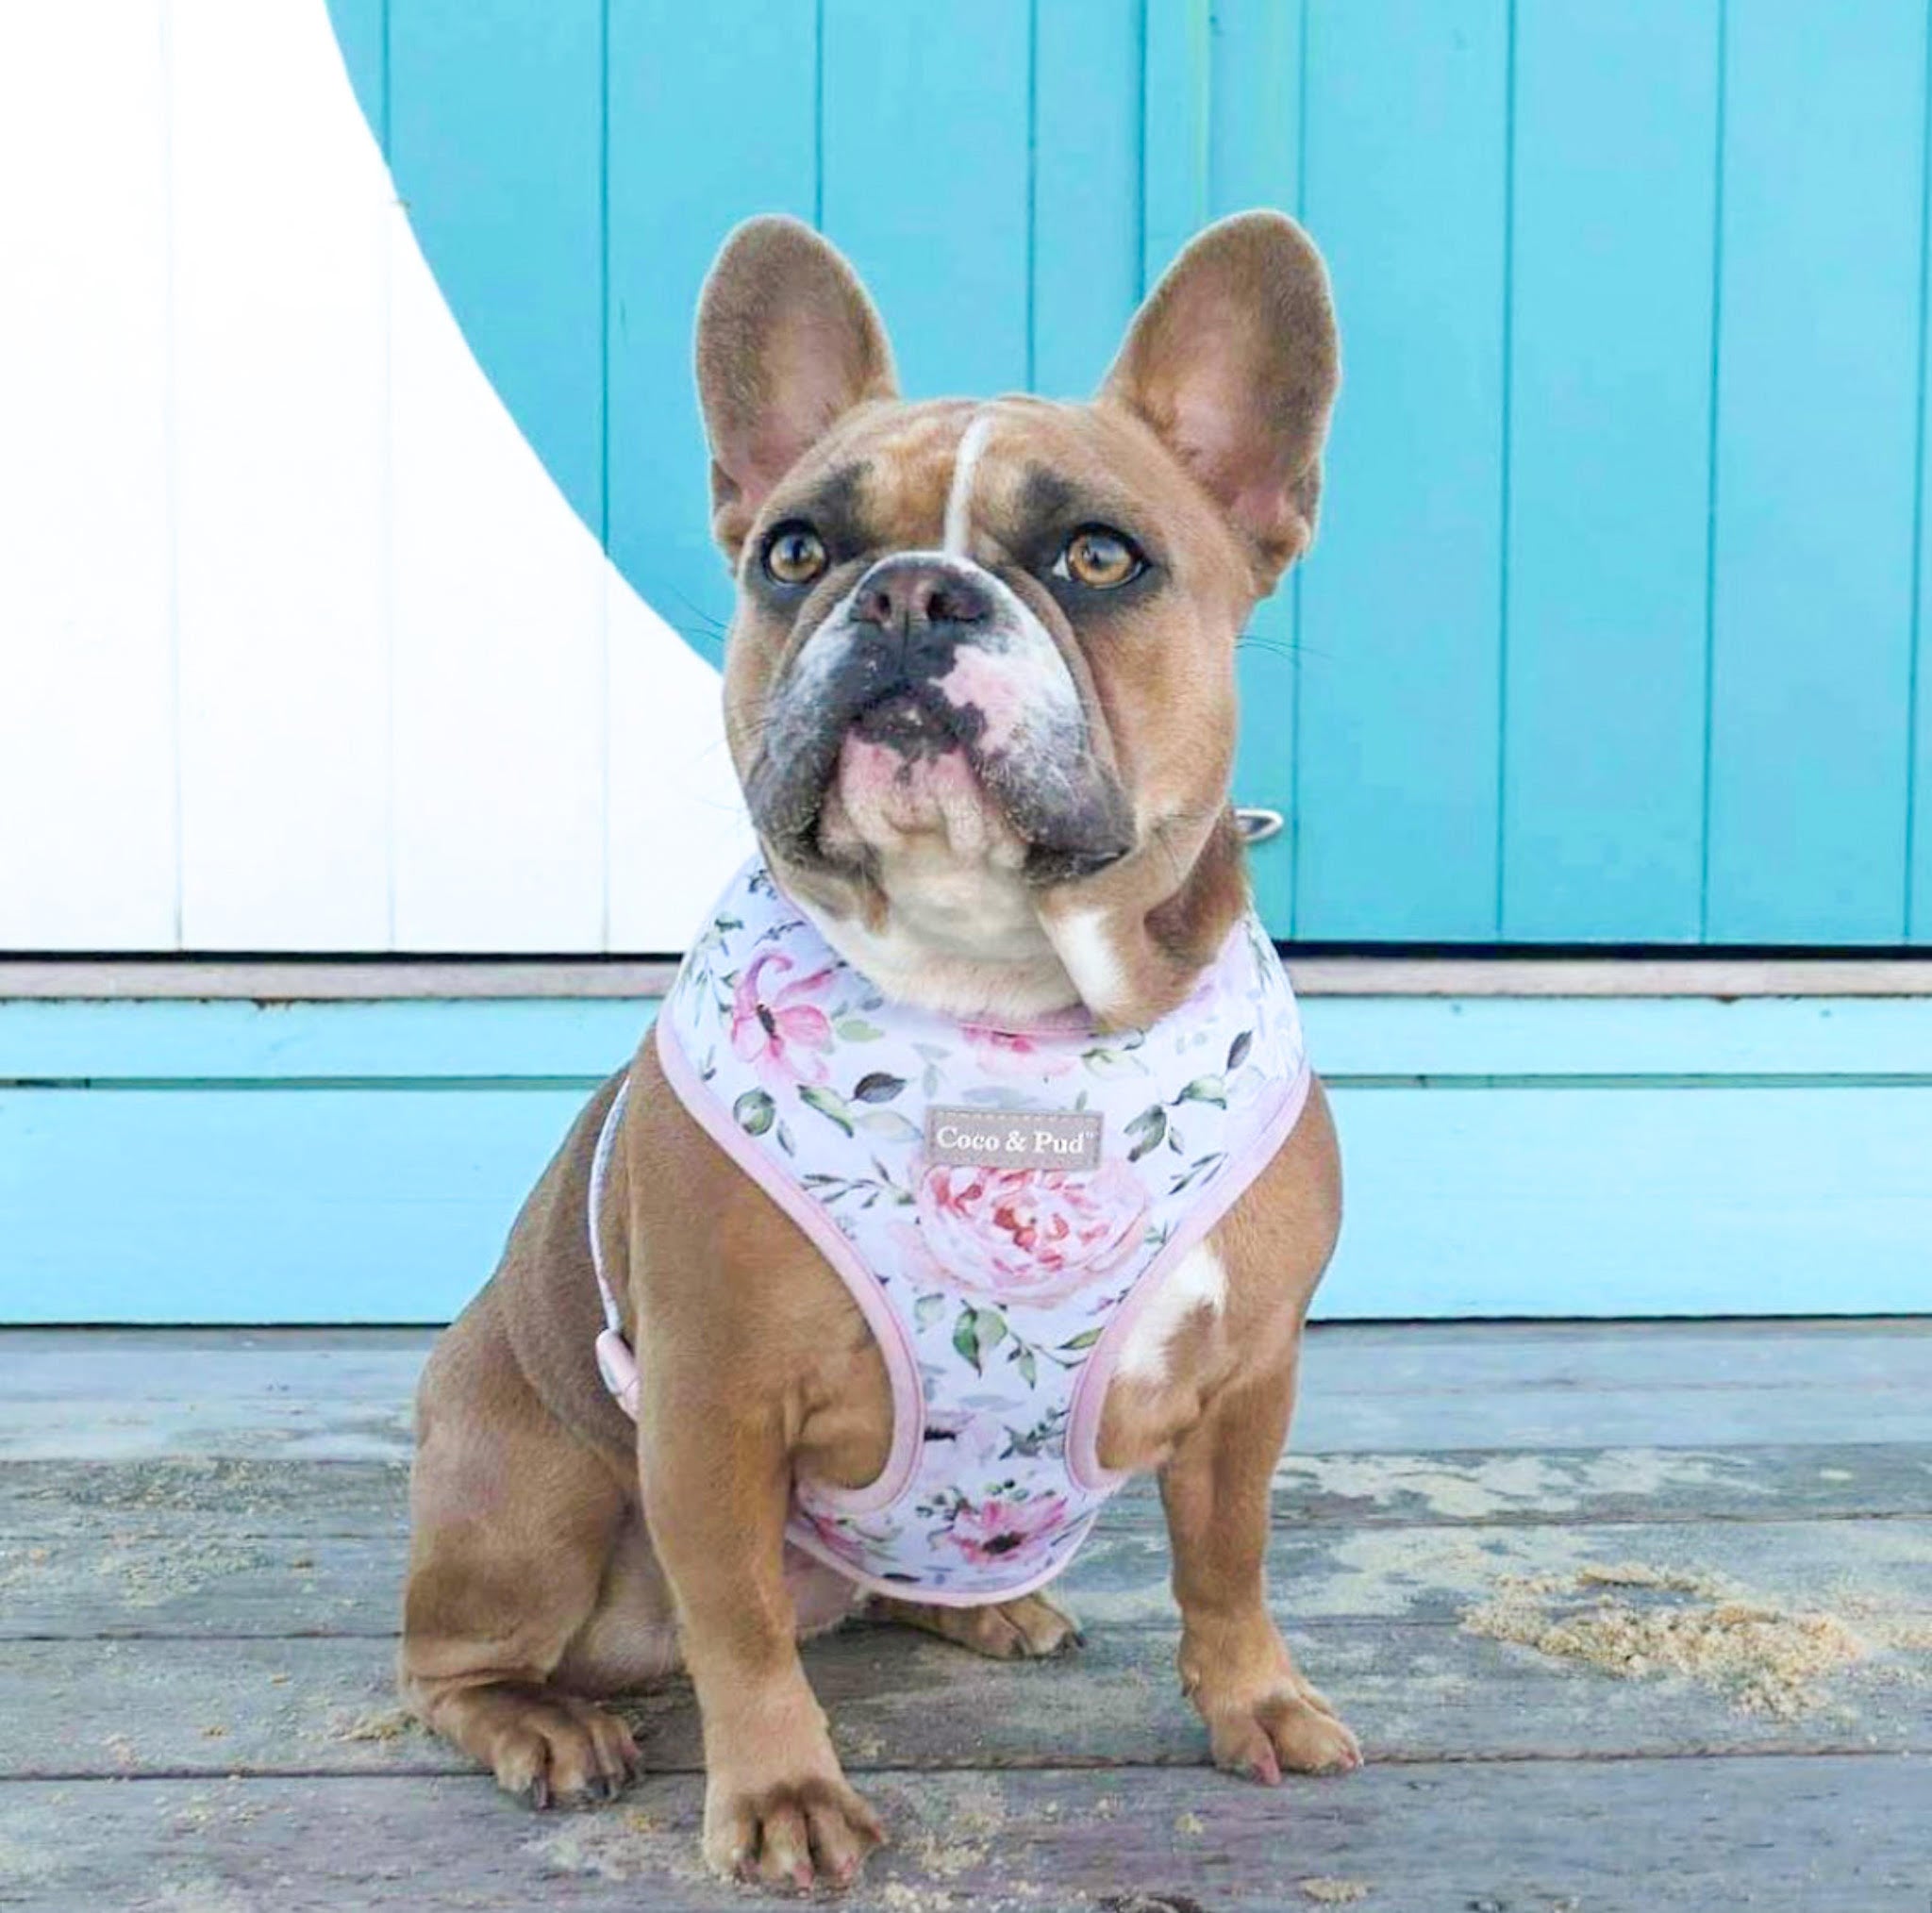 Coco & Pud Le Jardin Adjustable Dog Harness and Miss Milly the French Bulldog